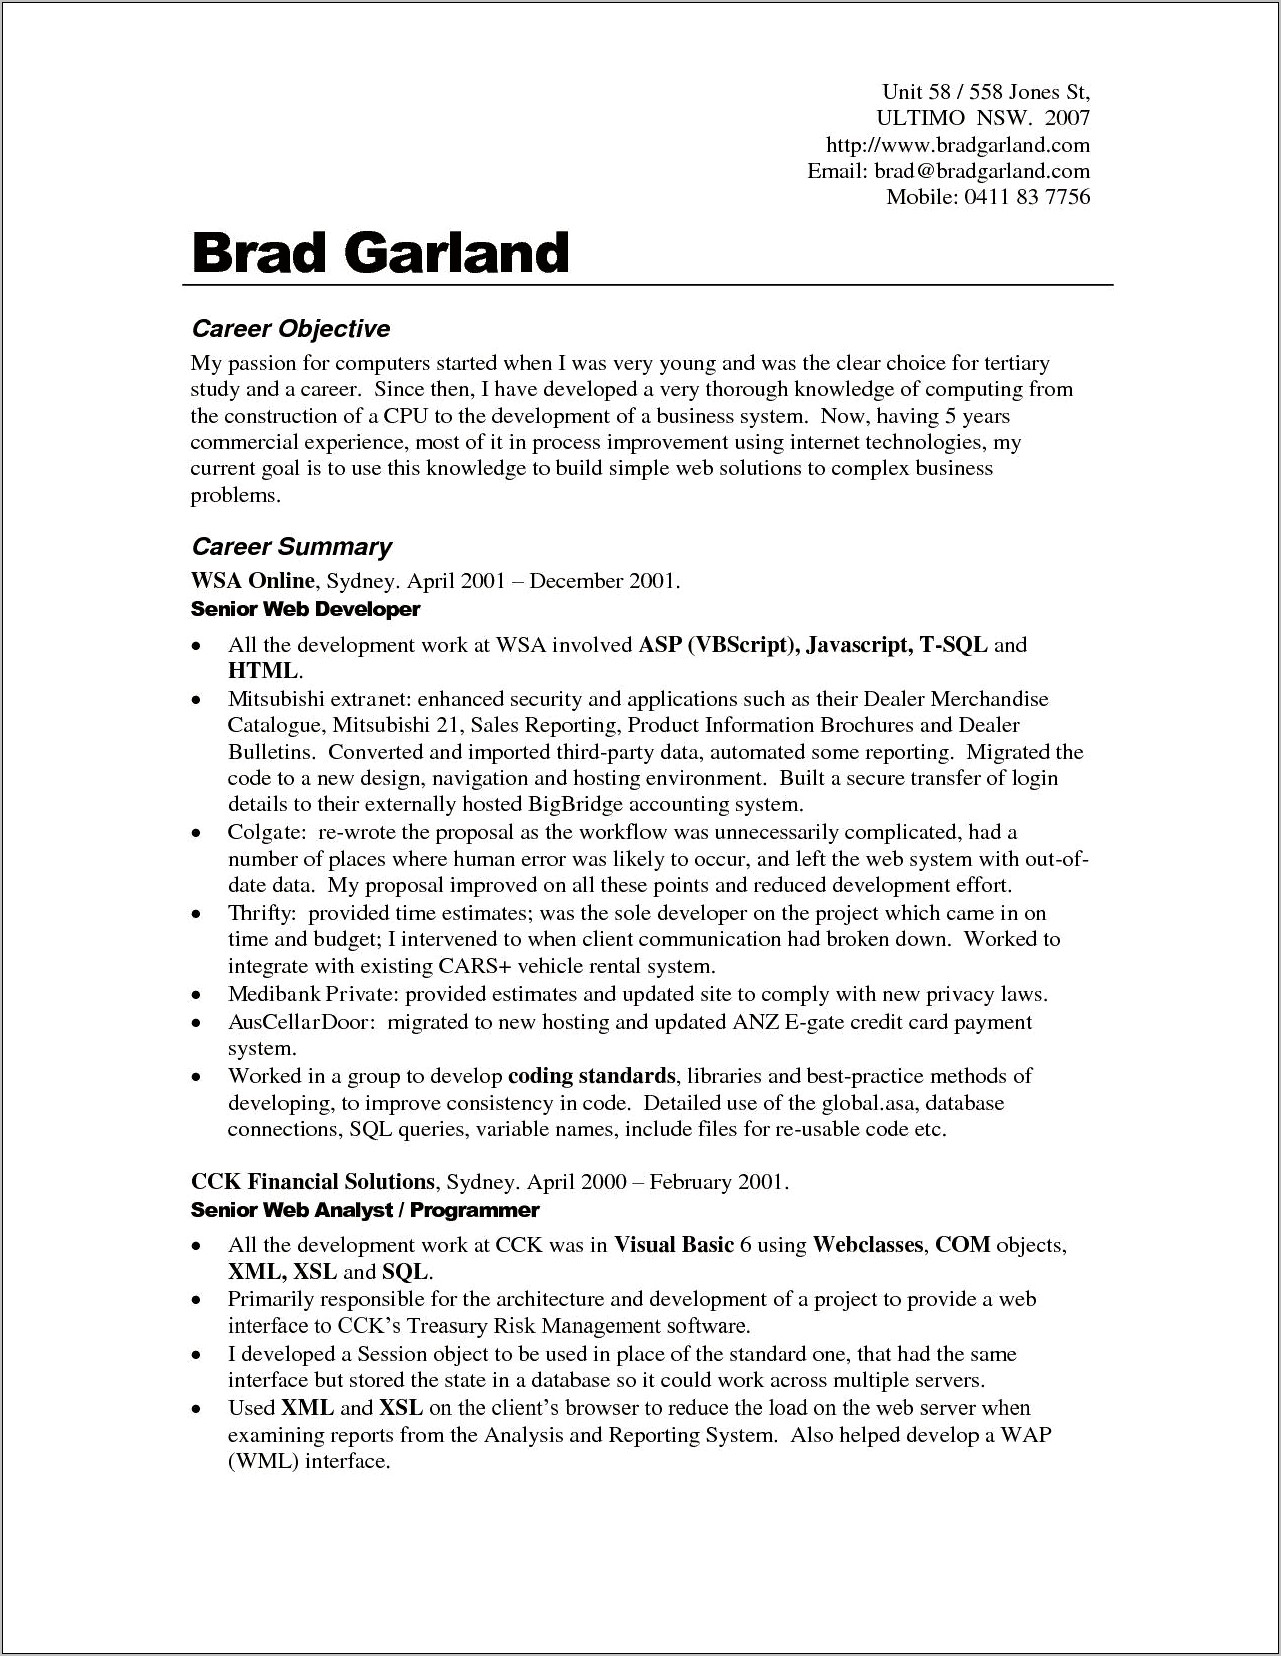 Examples Of Strong Objectives For Resumes